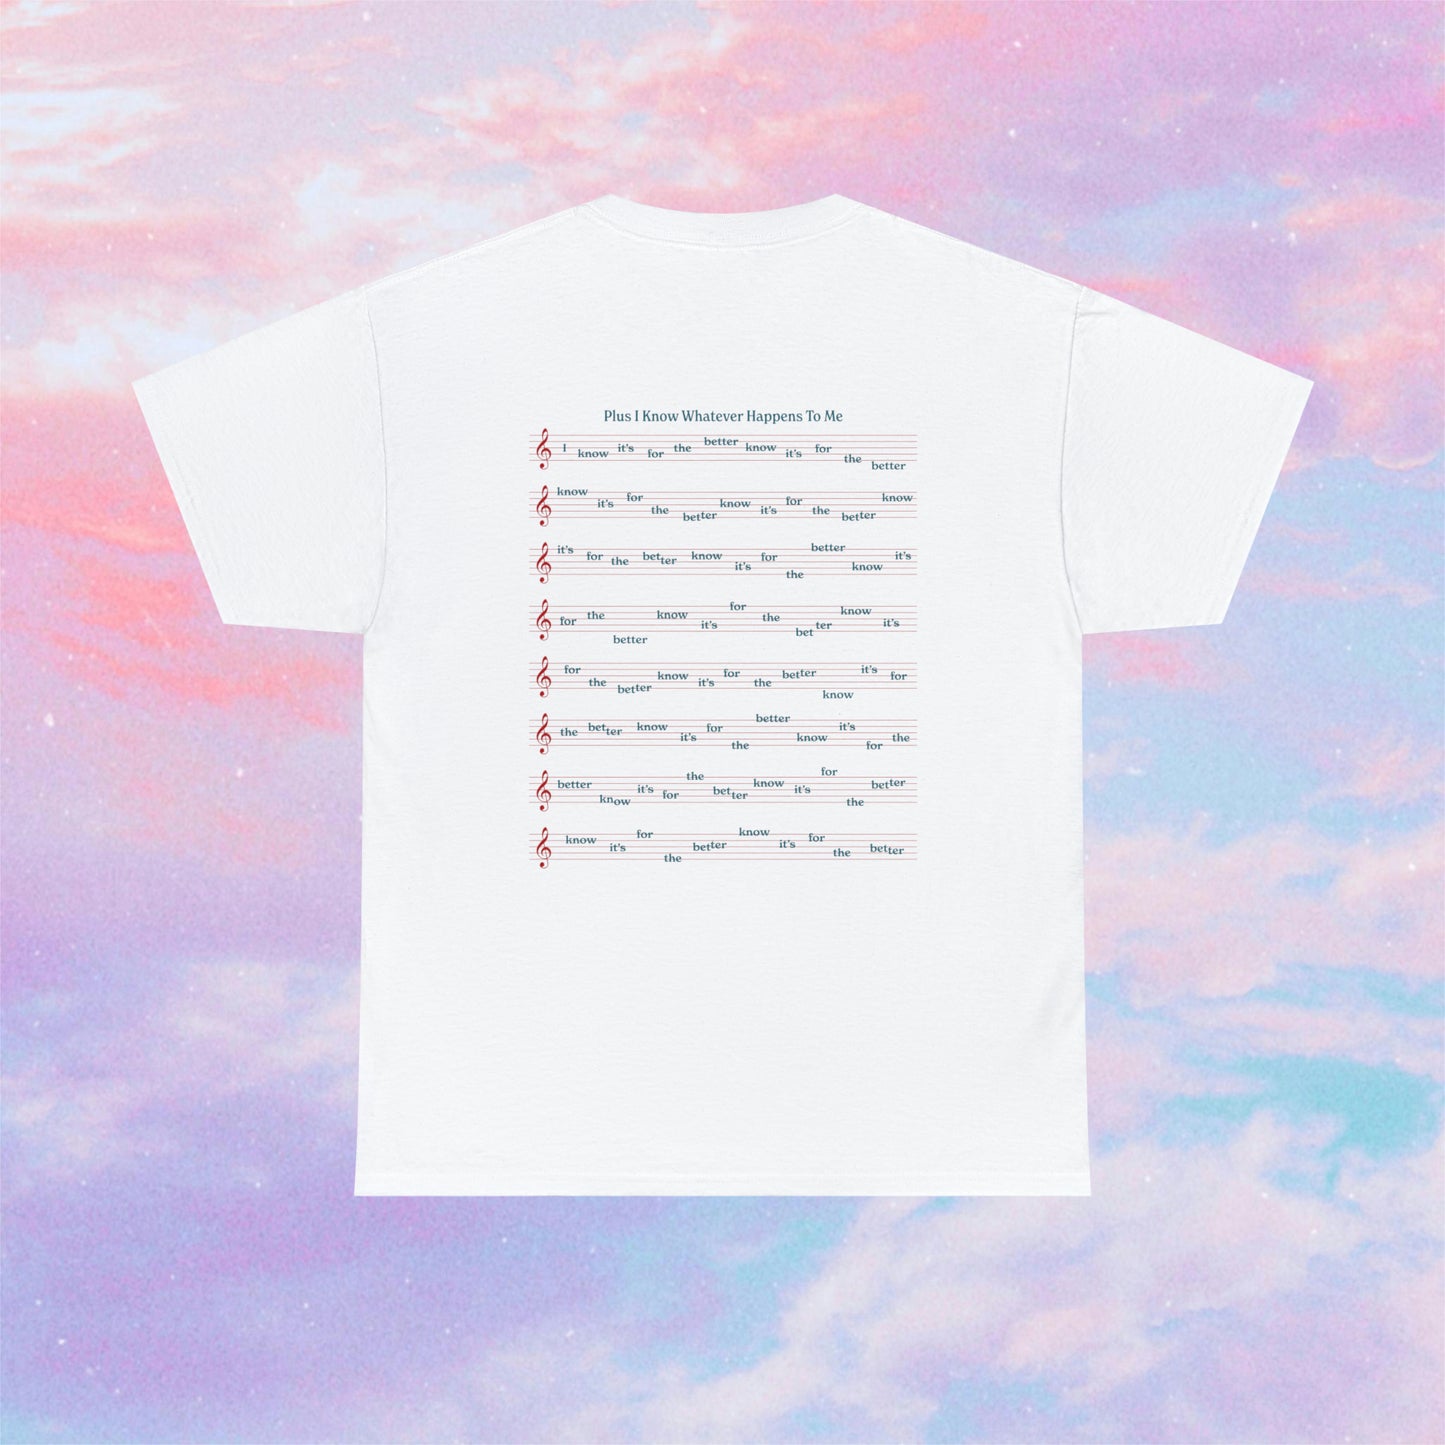 For The Better DOUBLE-SIDED Tee